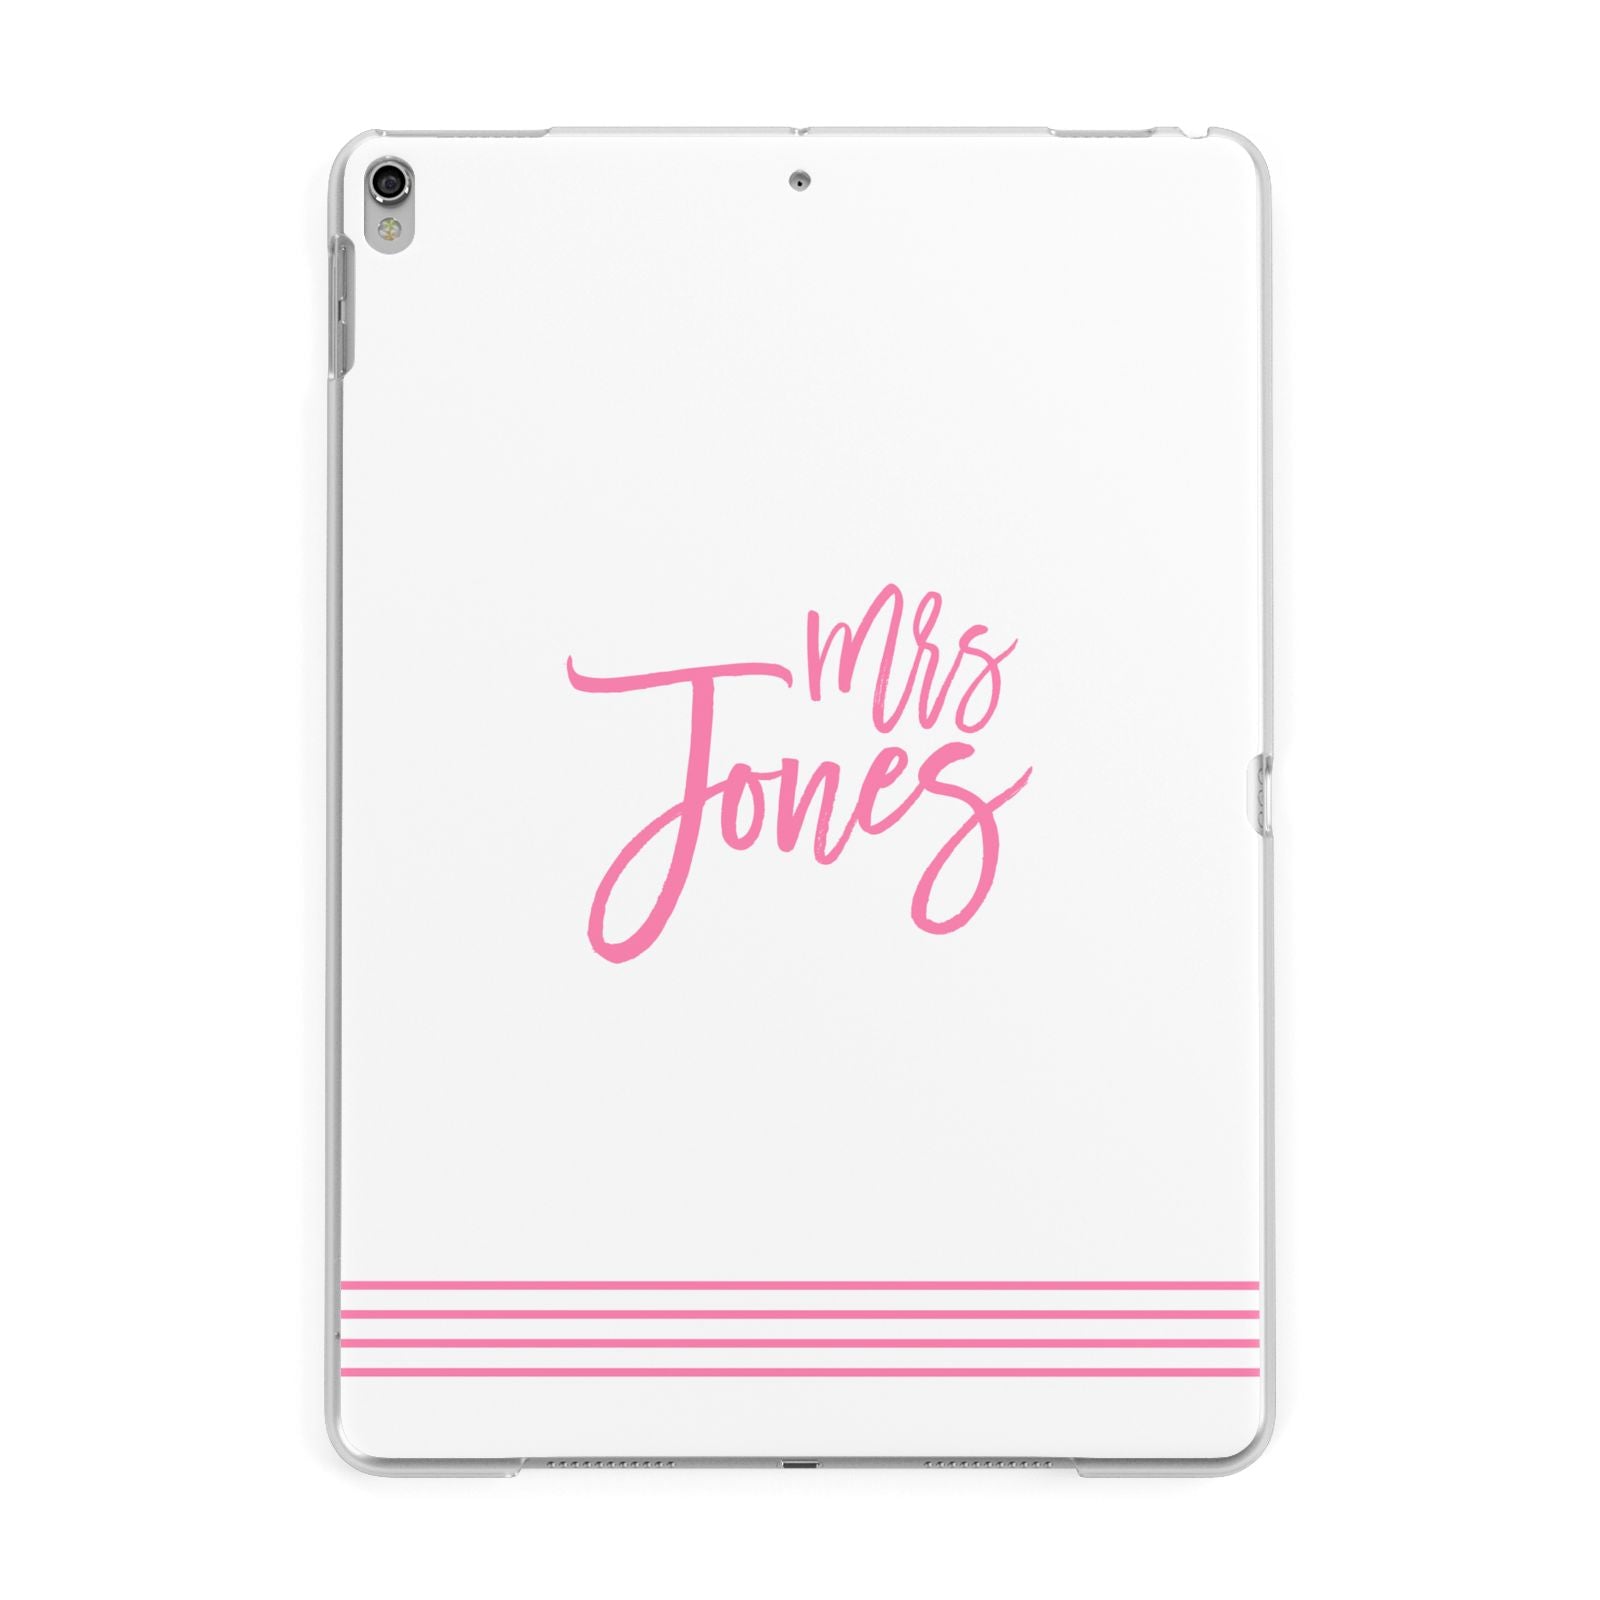 Personalised Hers Apple iPad Silver Case